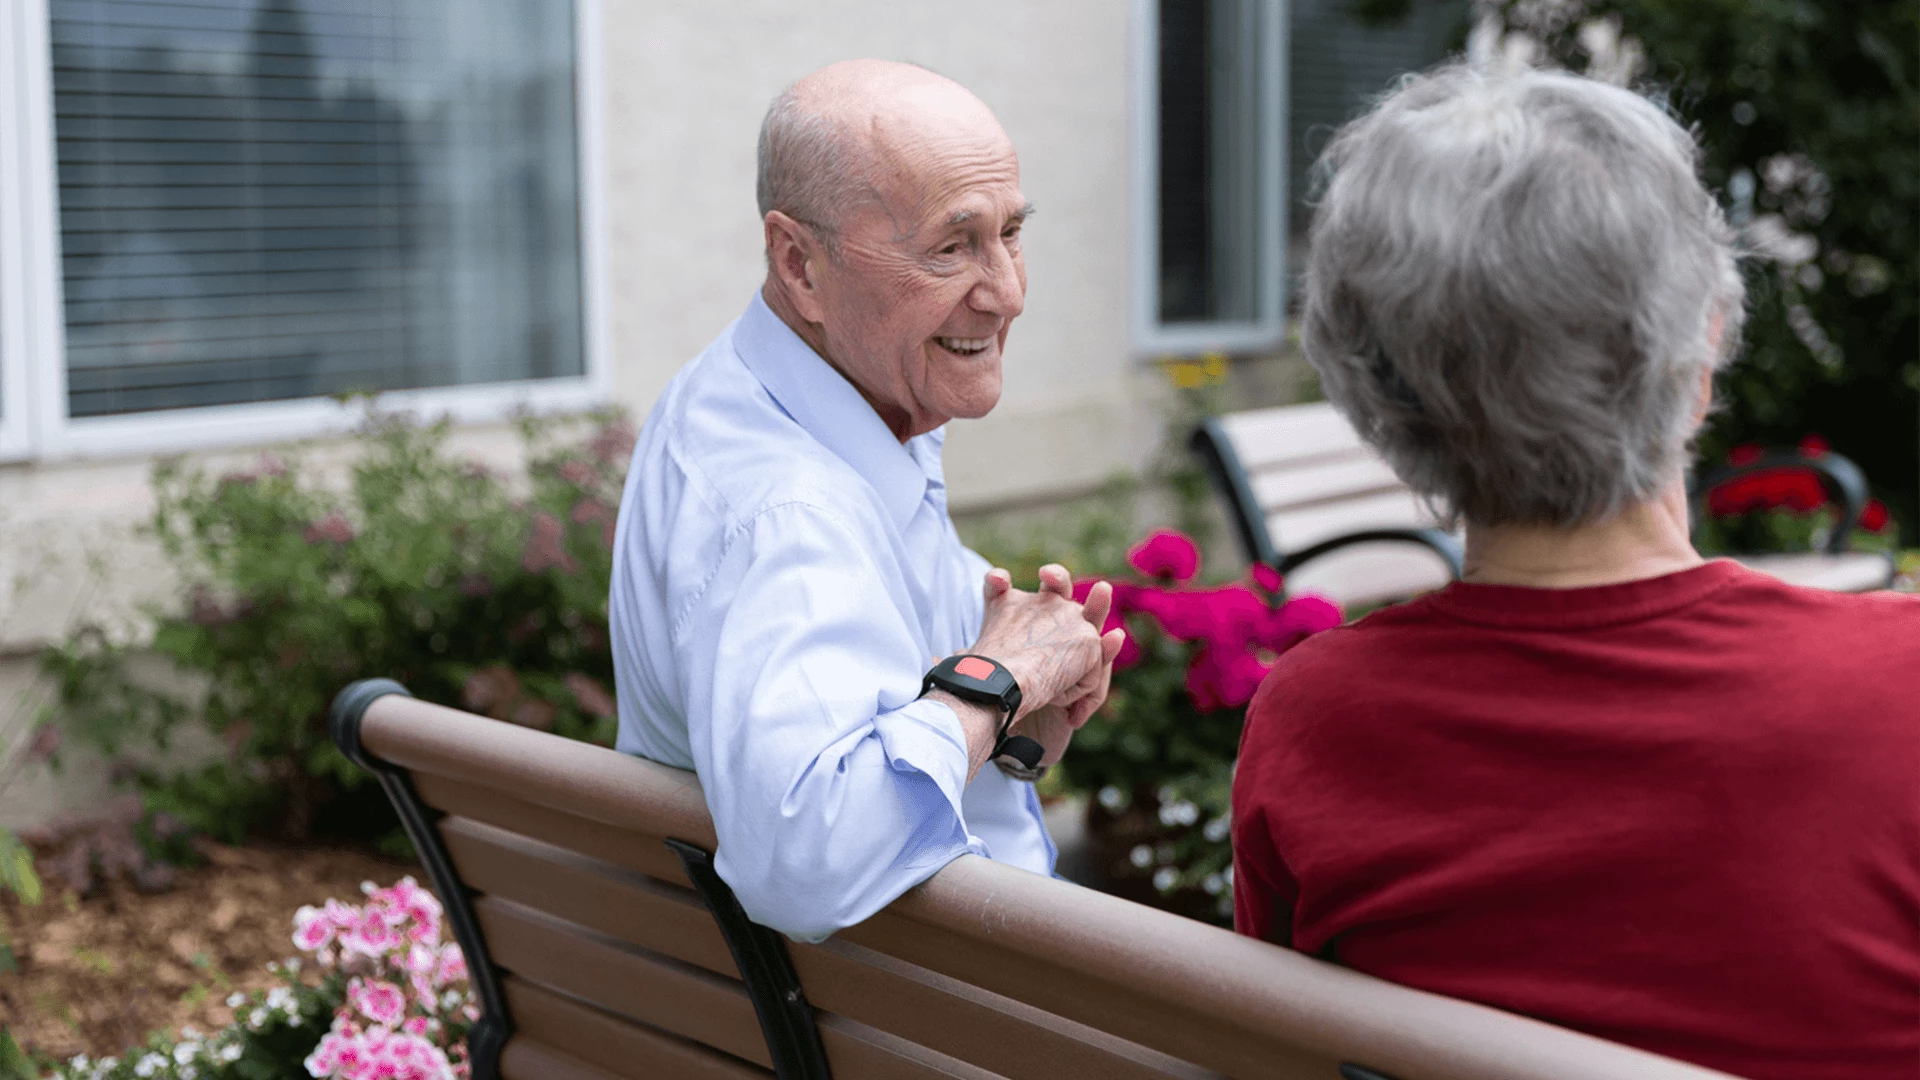 An elderly couple talking and smiling while sitting outside